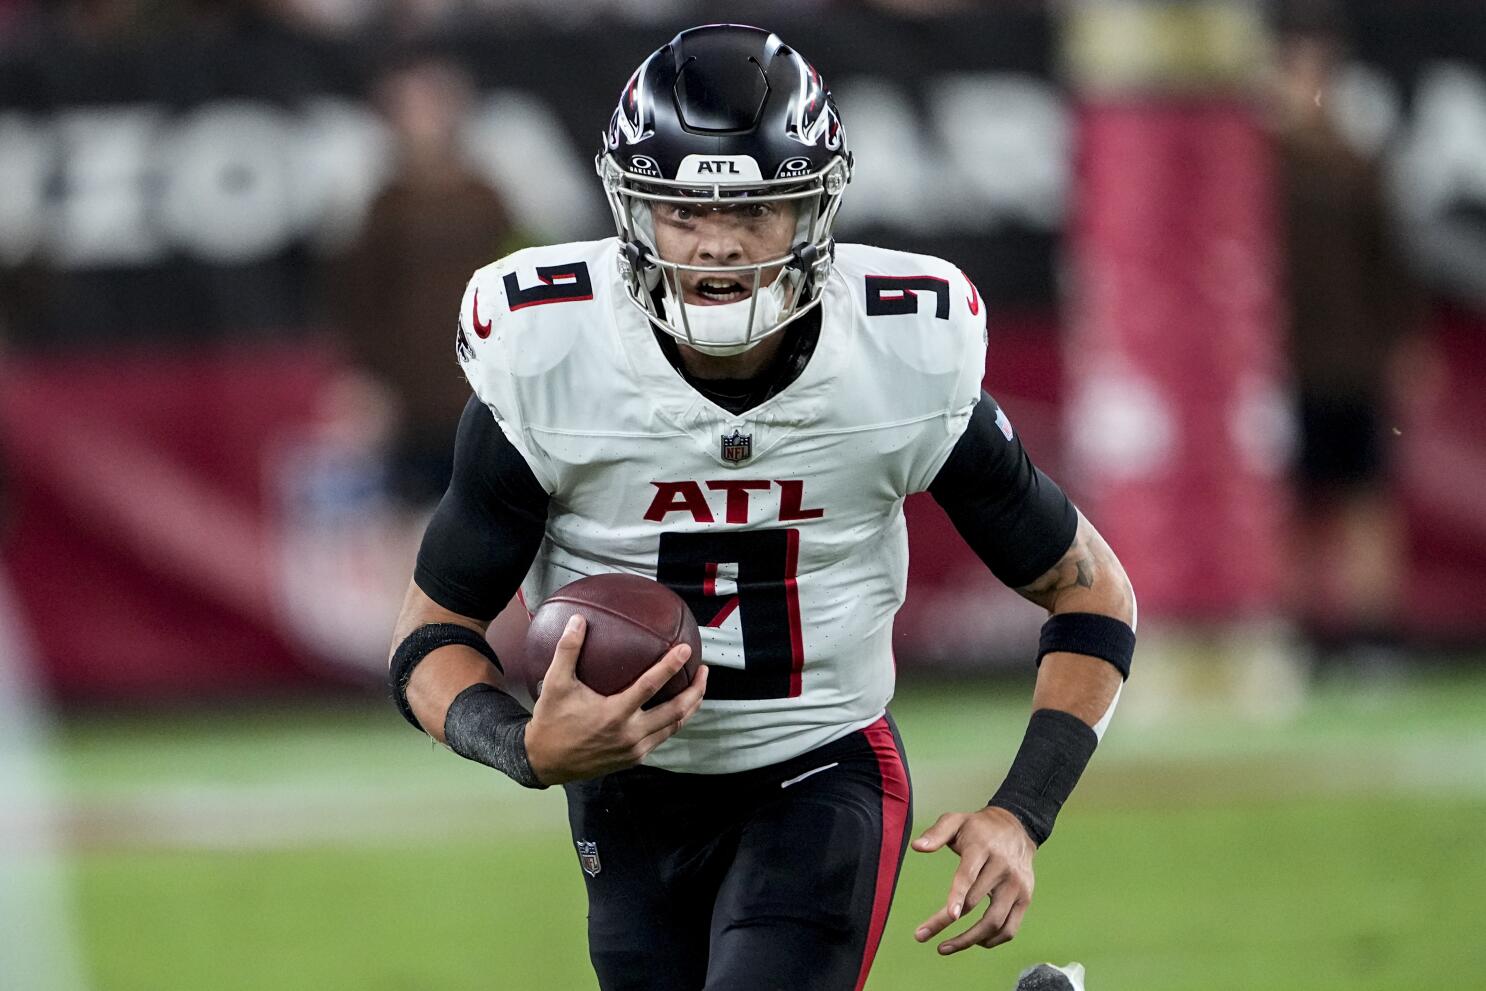 A look at quarterback situations across the NFC South